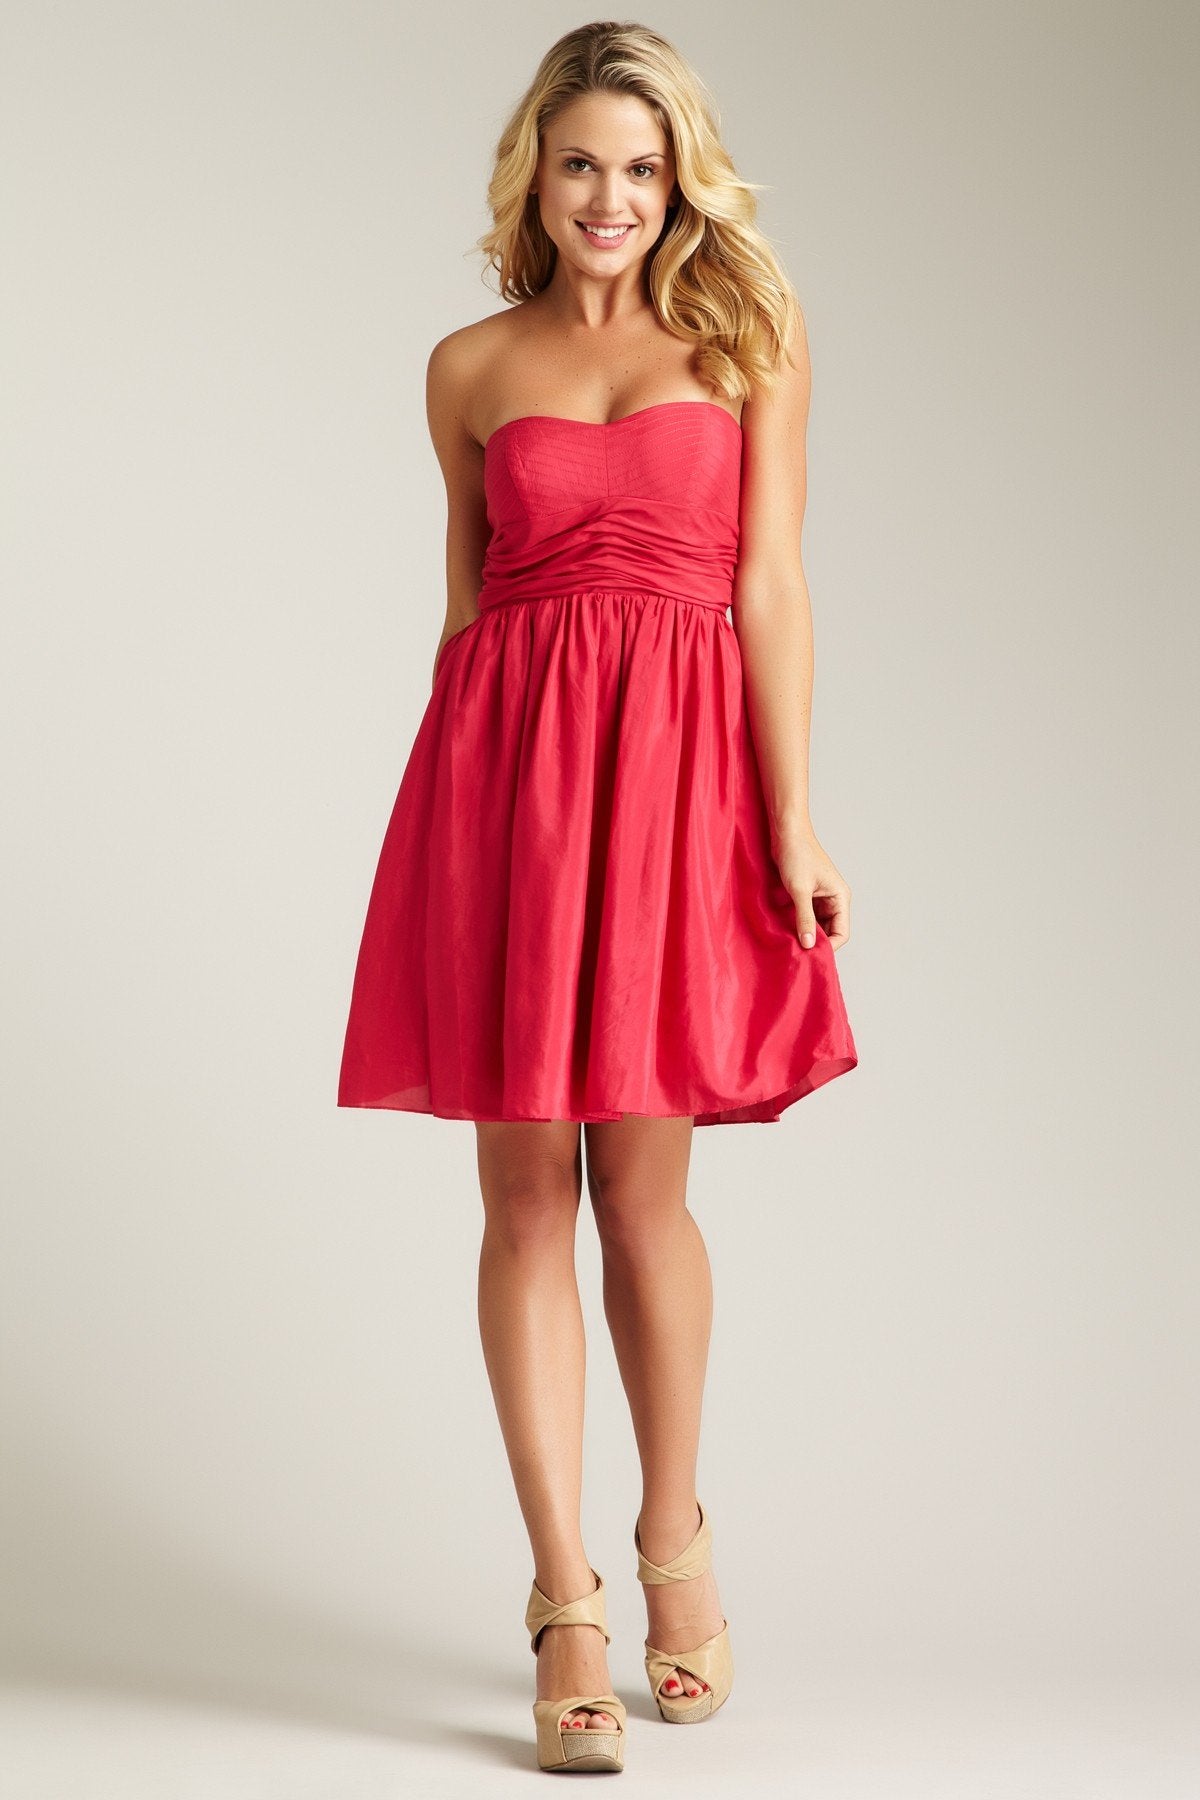 Jessica Simpson - JS2X3879 Short Stitched Sweetheart A-Line Dress In Pink